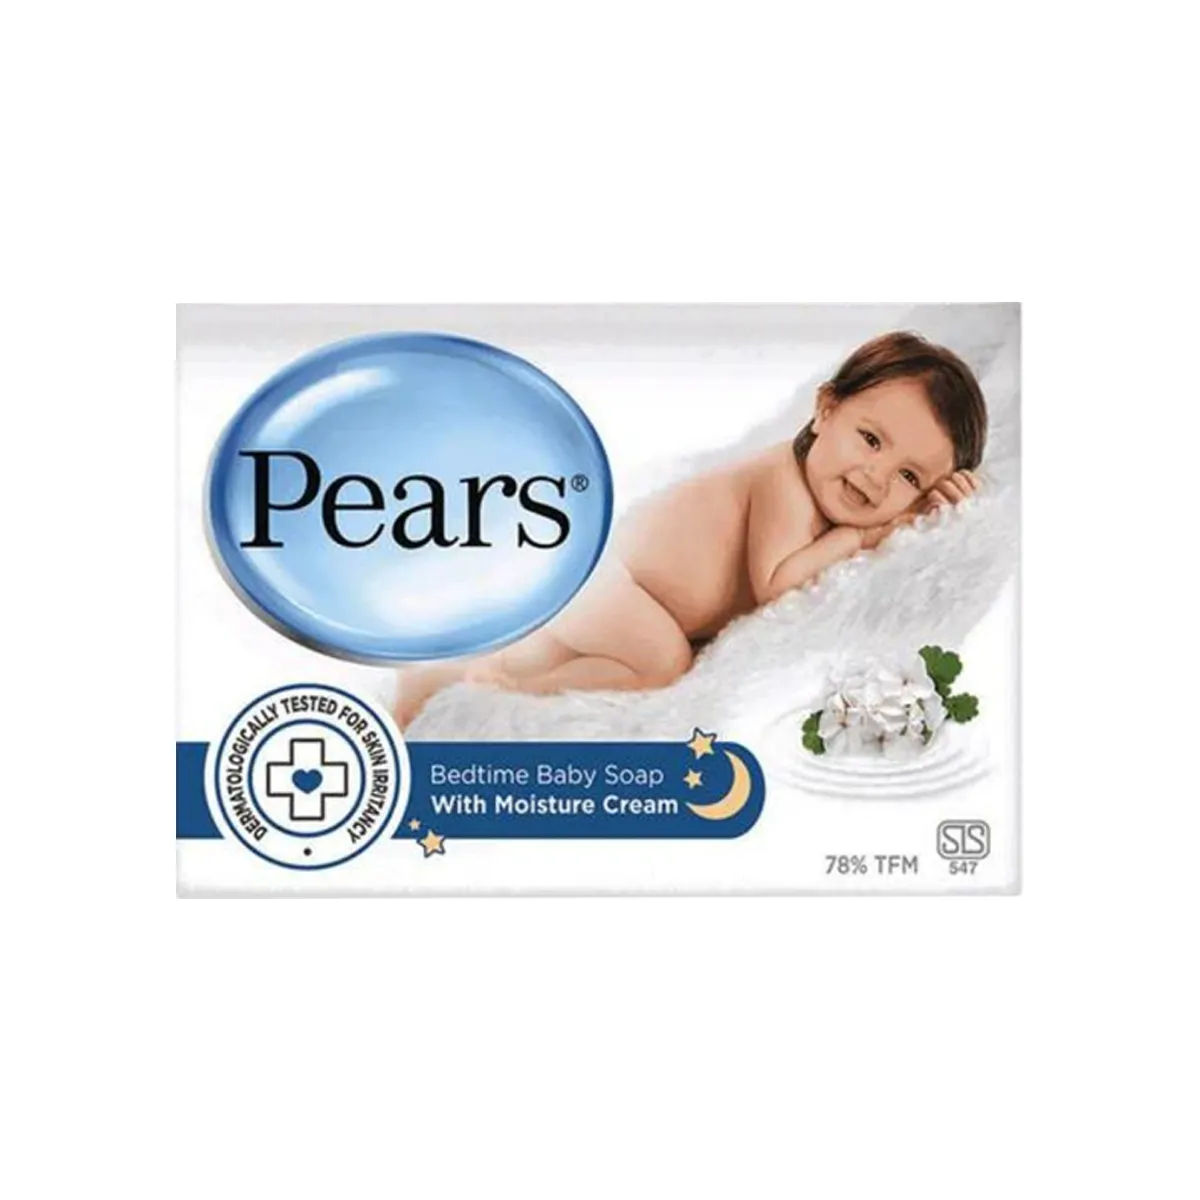 Pears Bedtime Baby Soap 90g